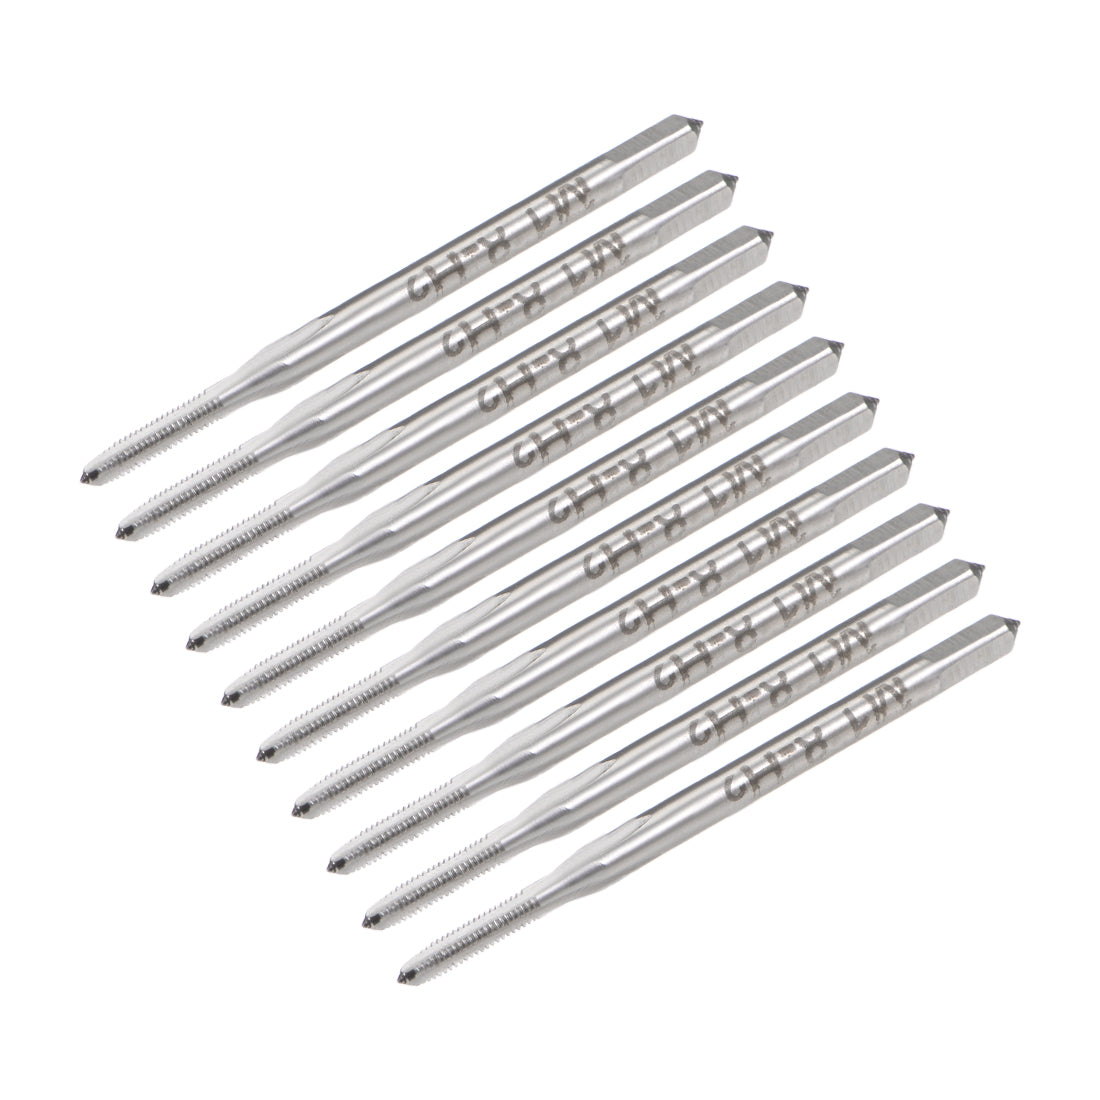 Uxcell Uxcell Metric Machine Tap M3.5 Thread 0.35 Pitch 3 Straight Flutes H2 High Speed Steel 10pcs